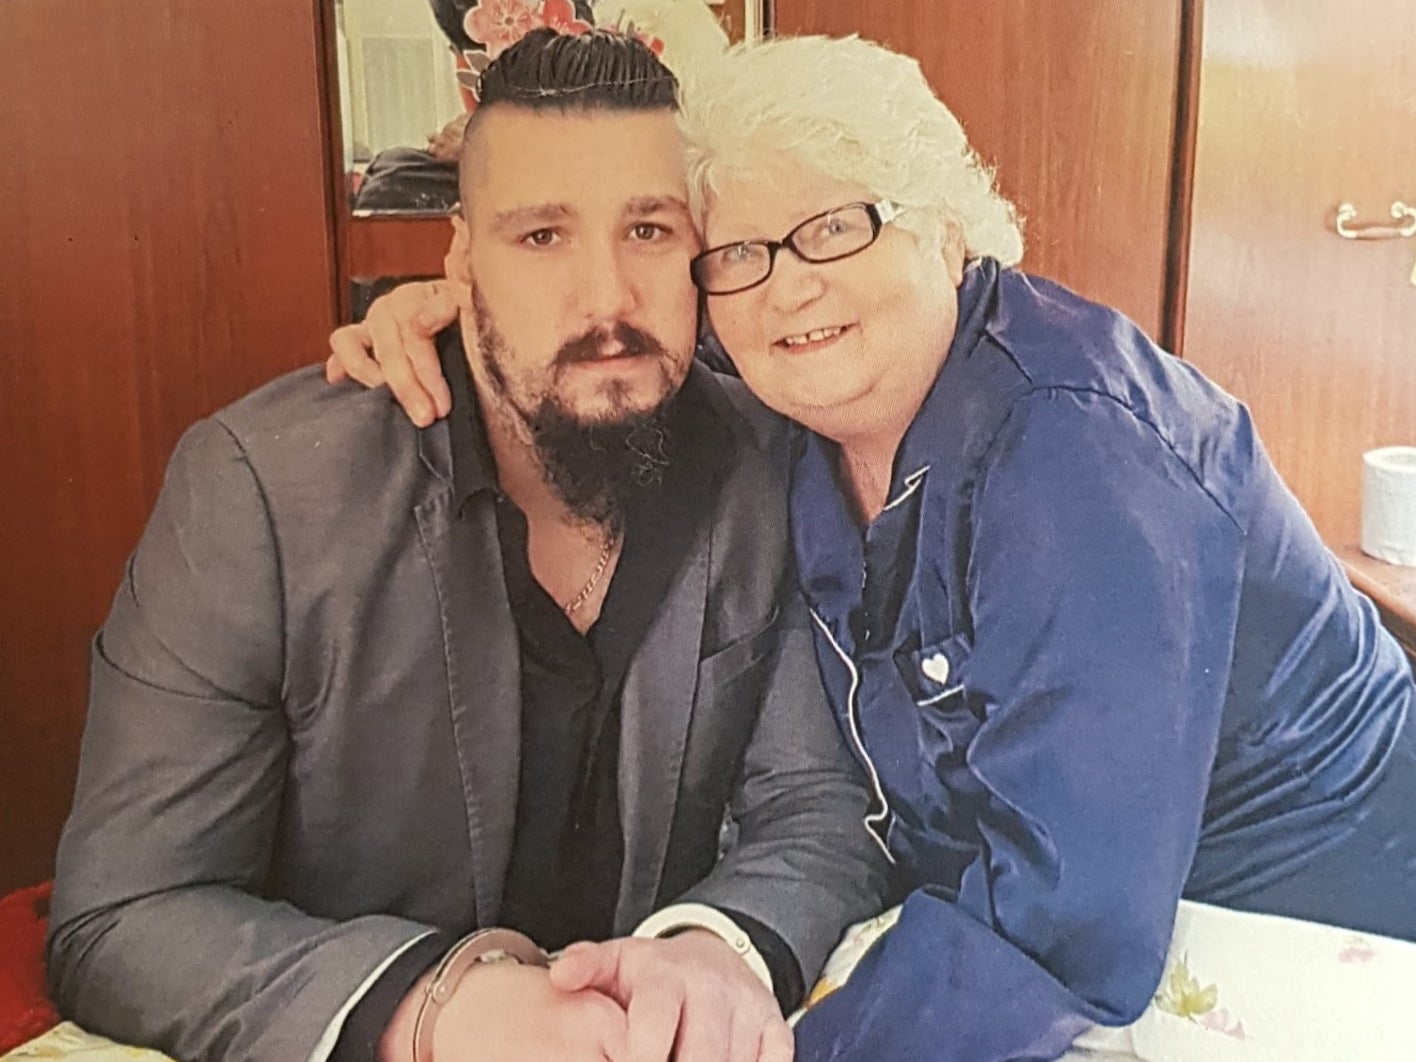 IPP prisoner Wayne Williams, pictured with his late grandmother, has served more than 18 years in prison after being given a 23-month jail sentence